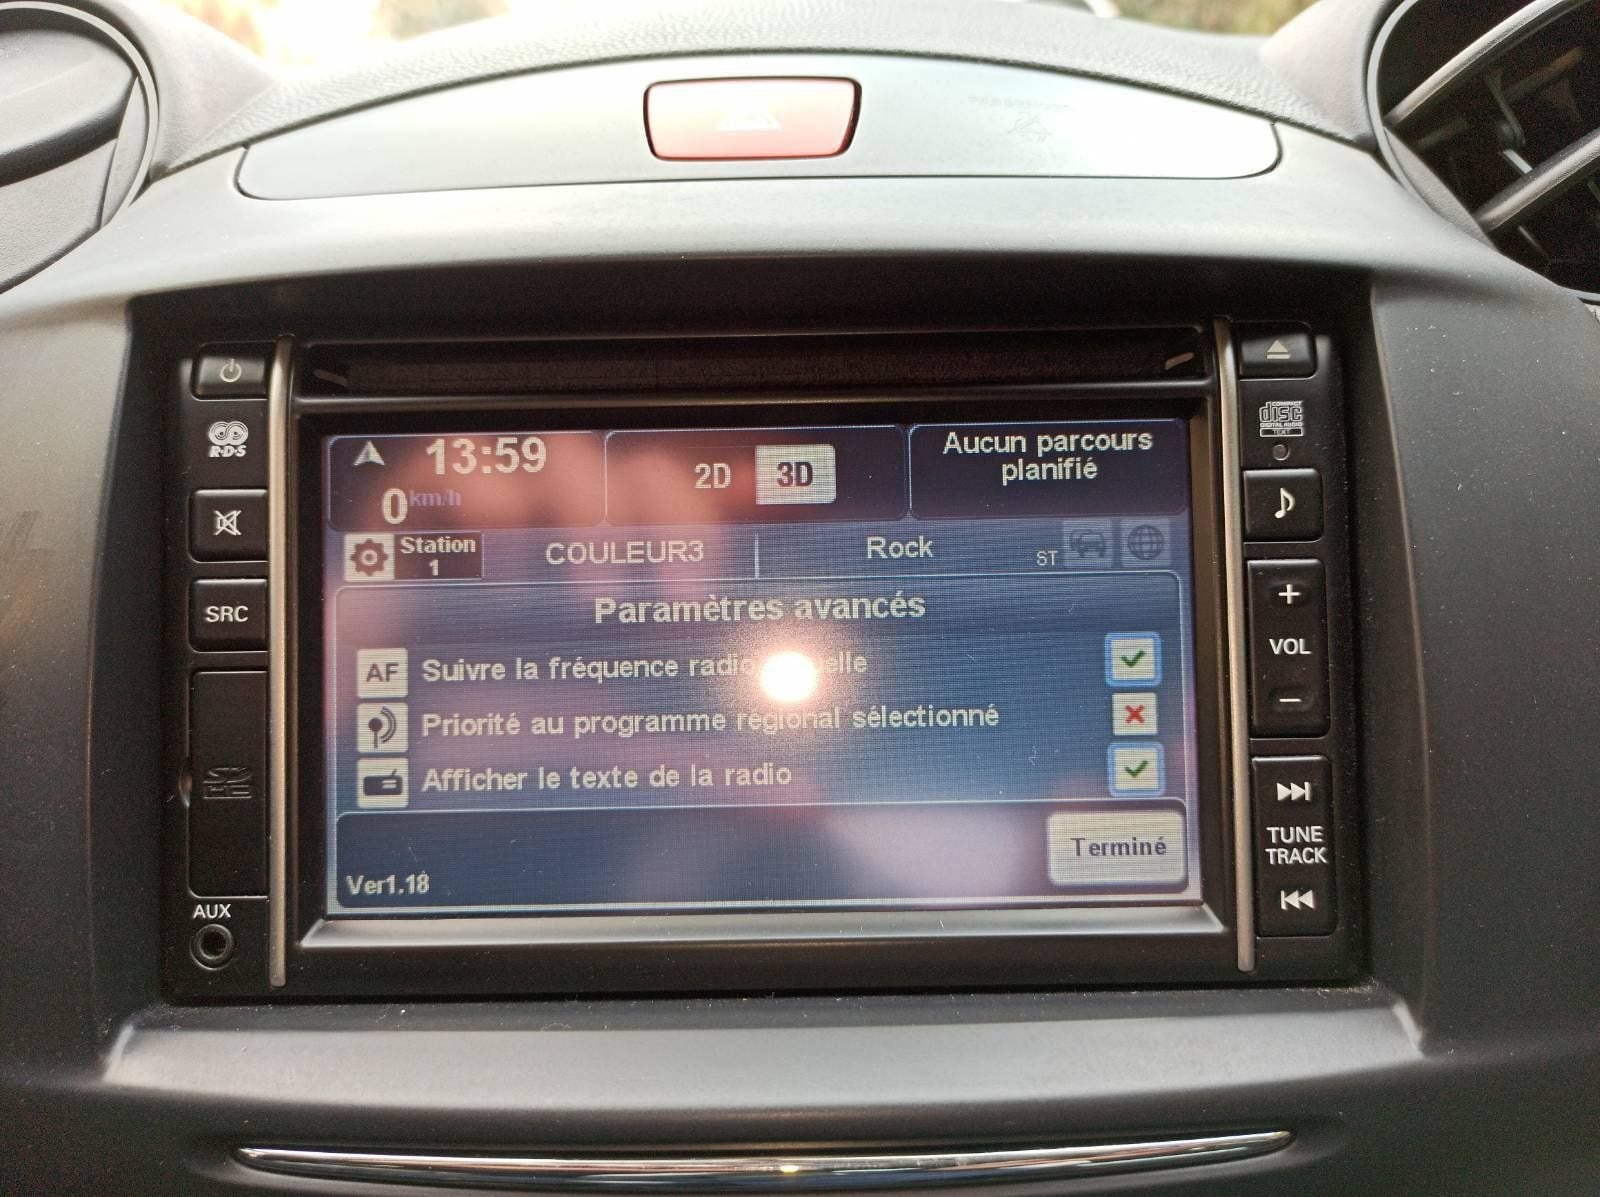 Which infotainment system is this - Mazda Forum - Mazda Enthusiast Forums